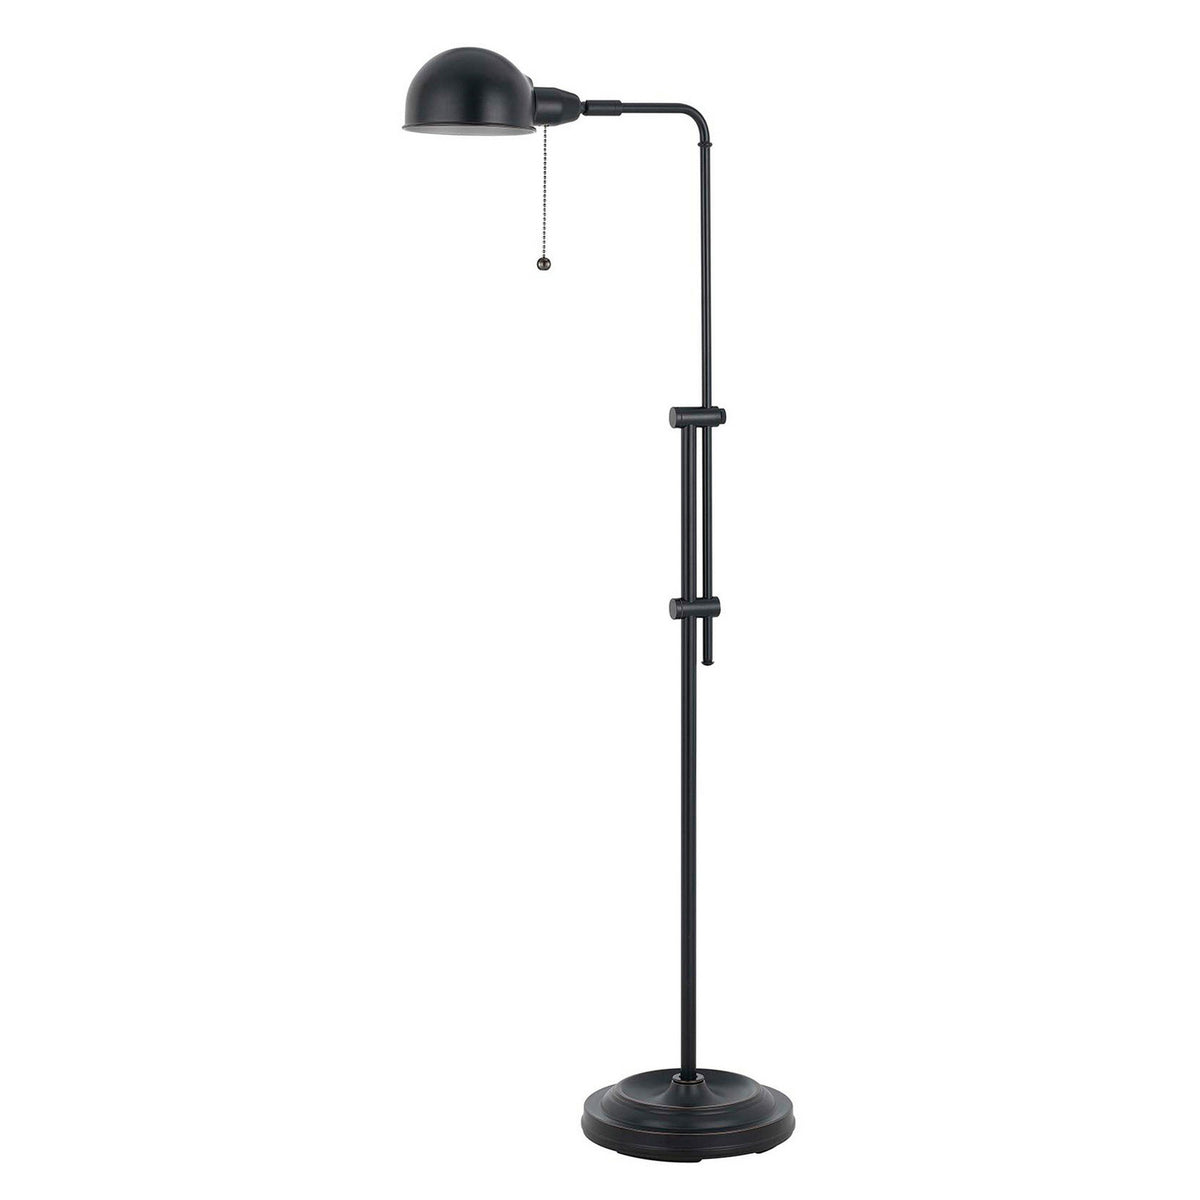 Adjustable Height Metal Pharmacy Lamp with Pull Chain Switch, Black - BM220838